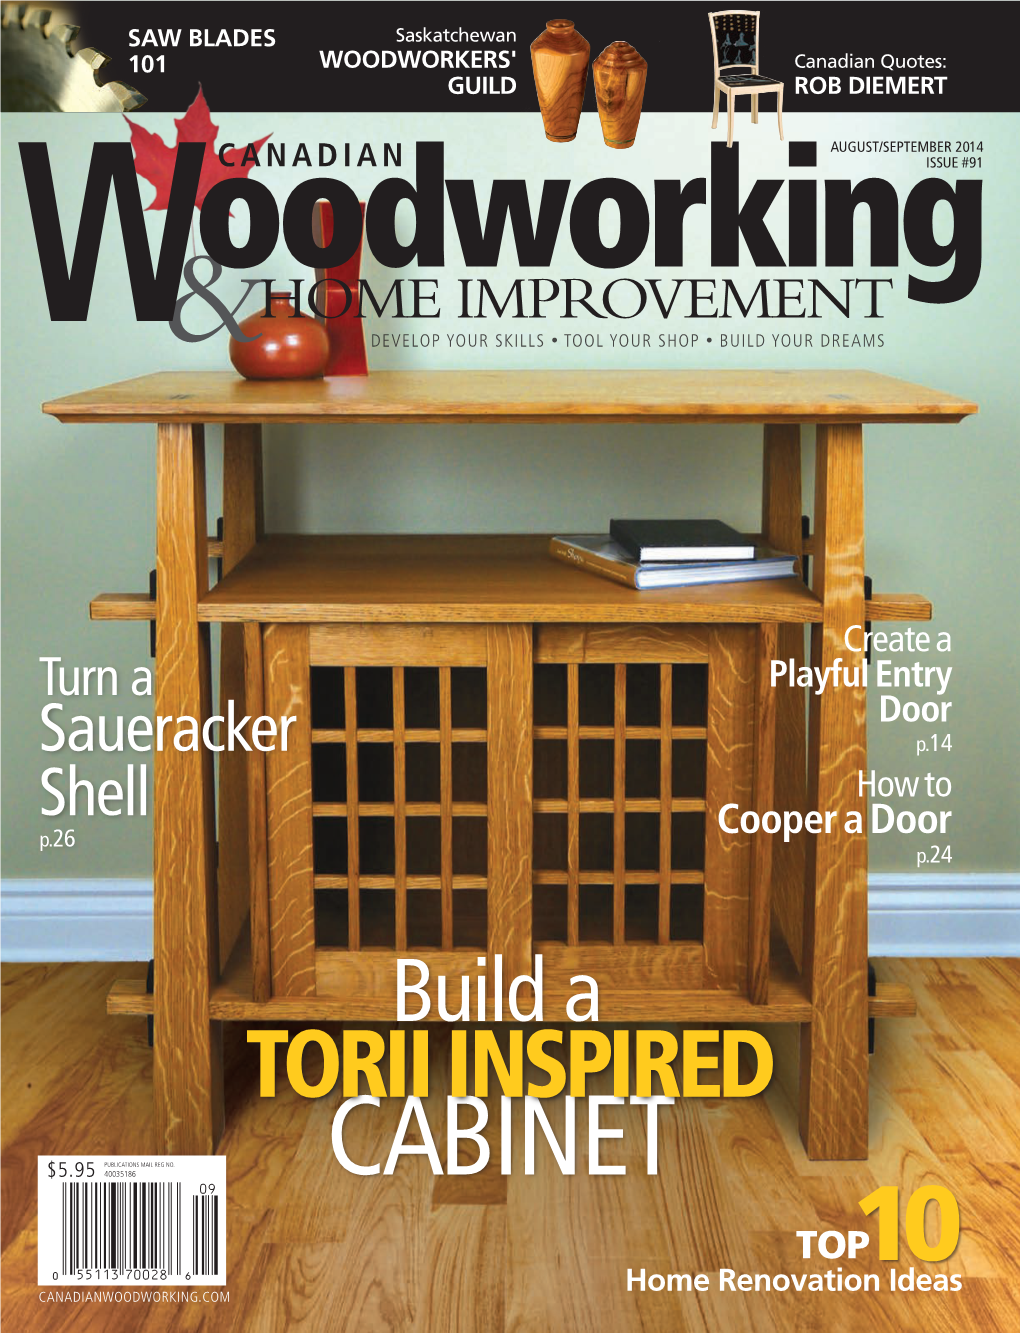 Canadian Woodworking 091 (August-September 2014)